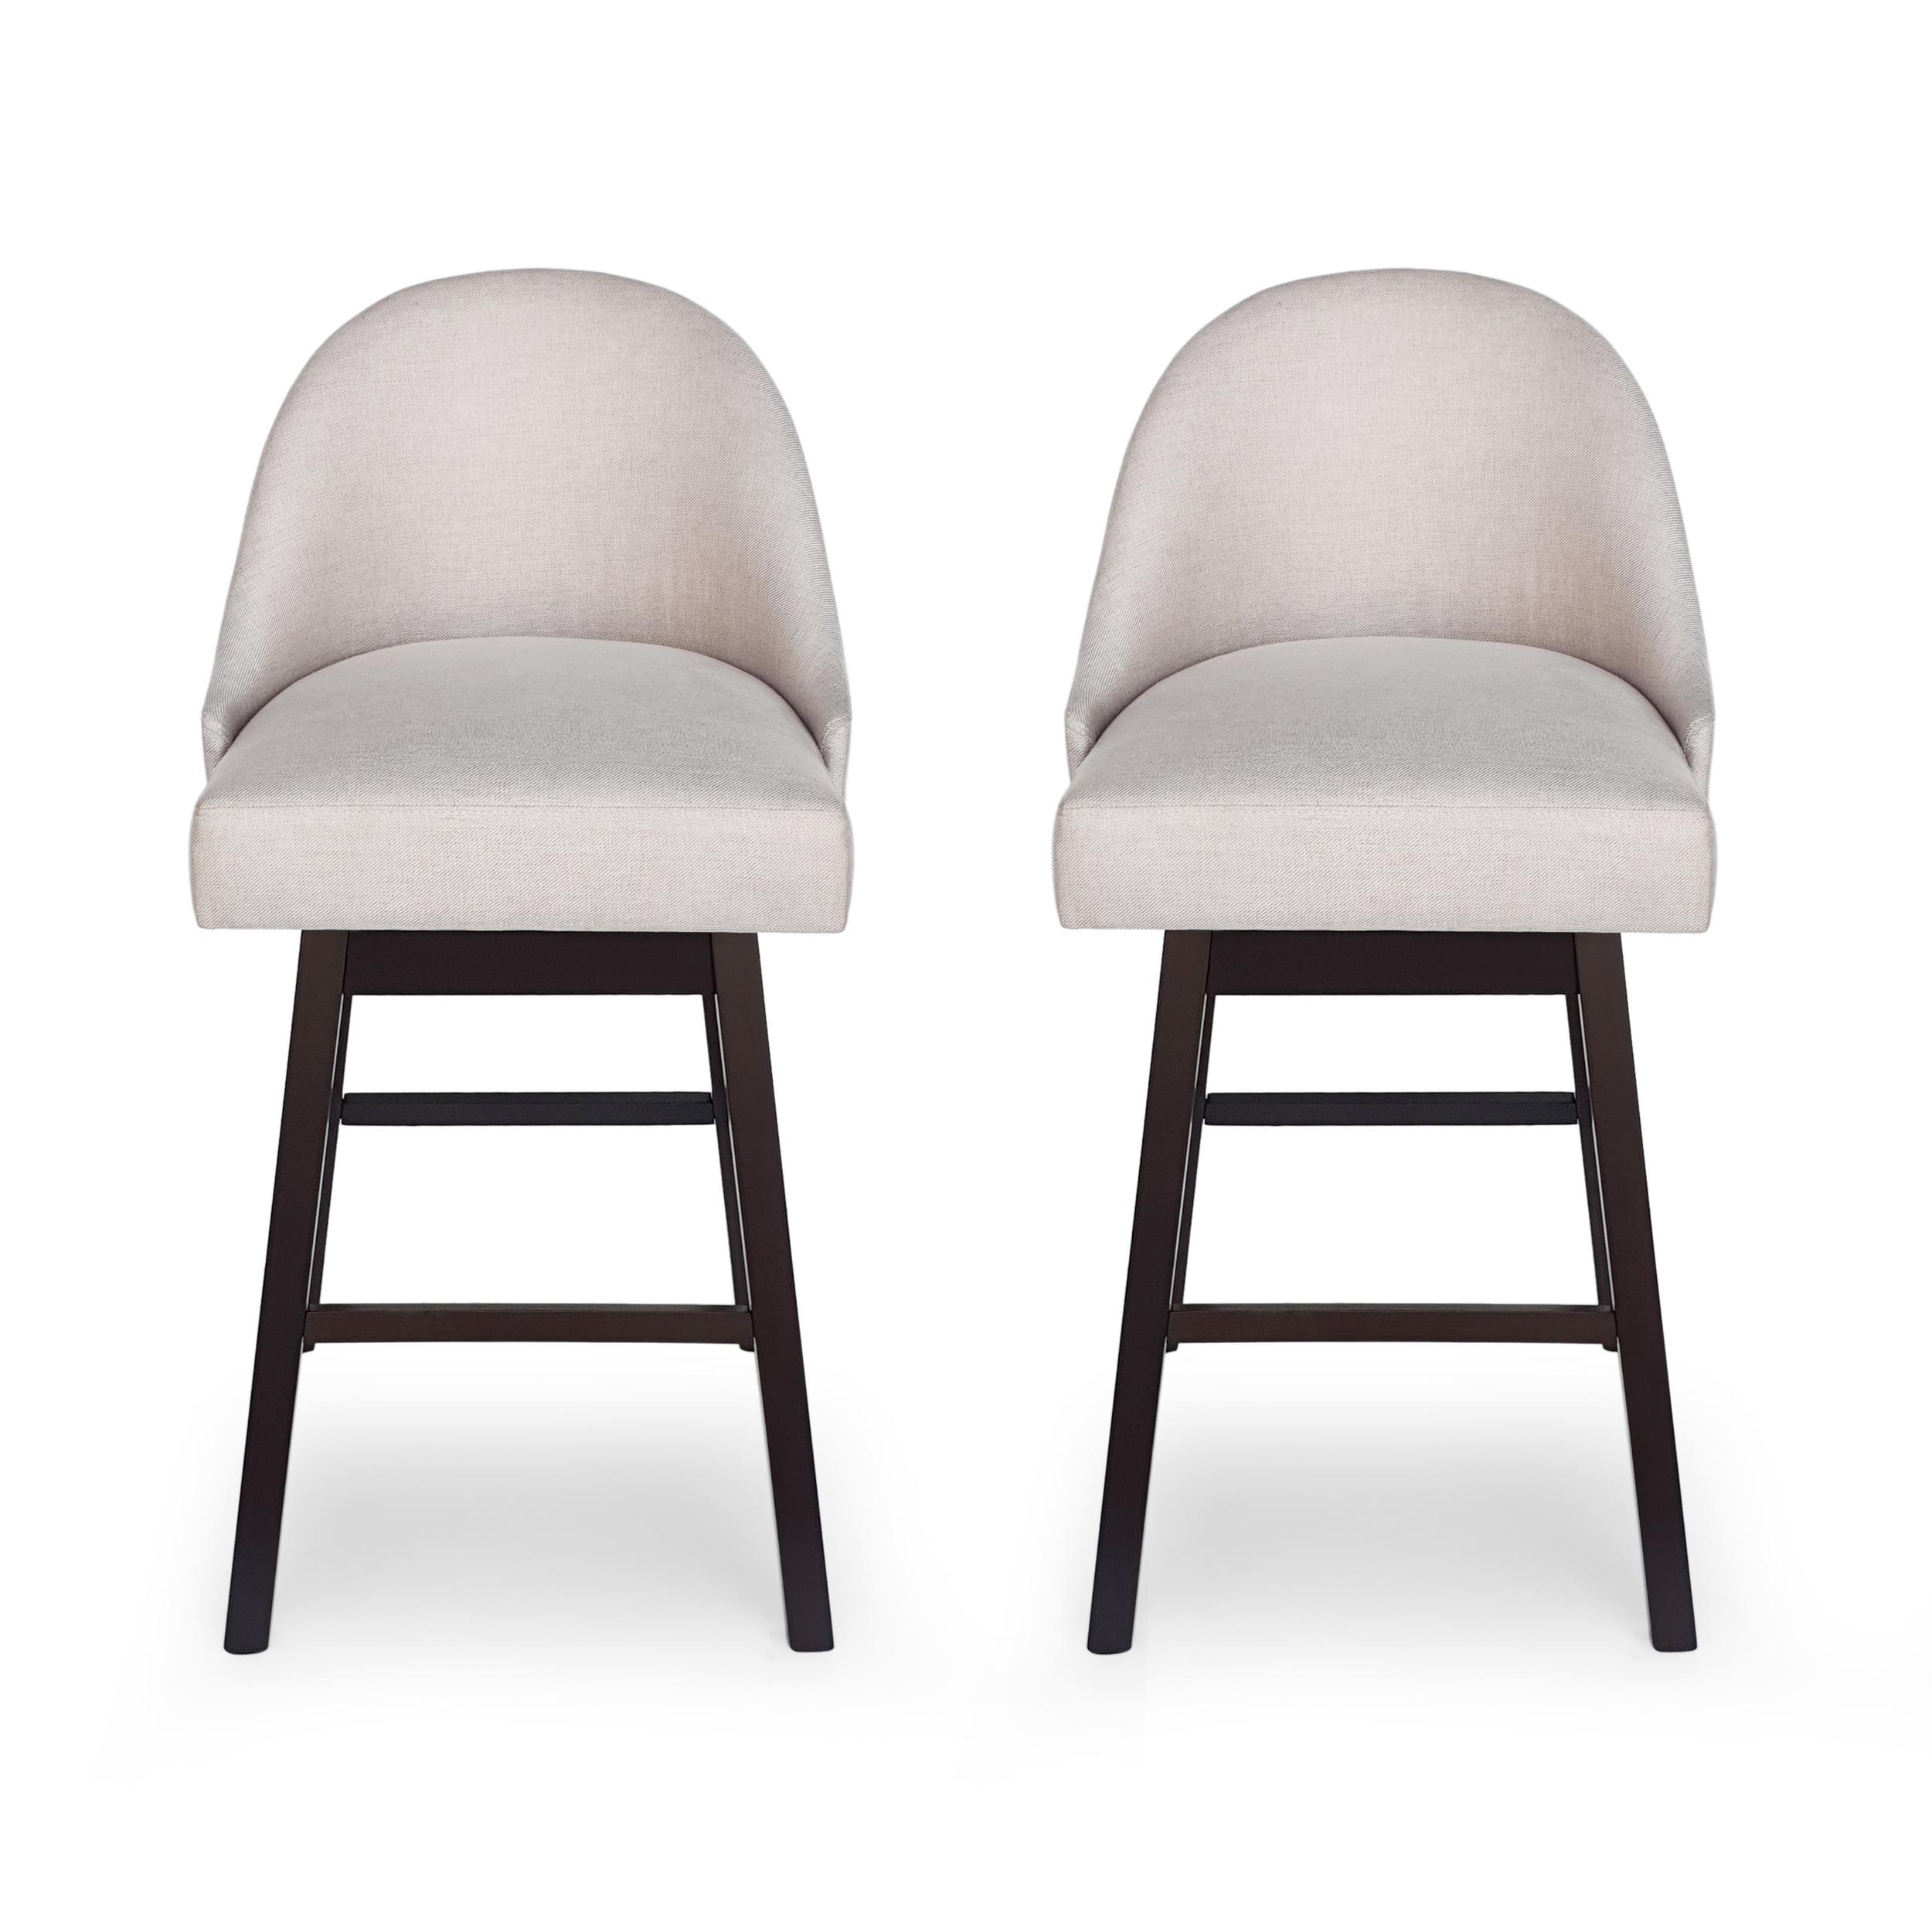 Swivel High-Back Barstool Duo in Natural Wood & Wheat Polyester